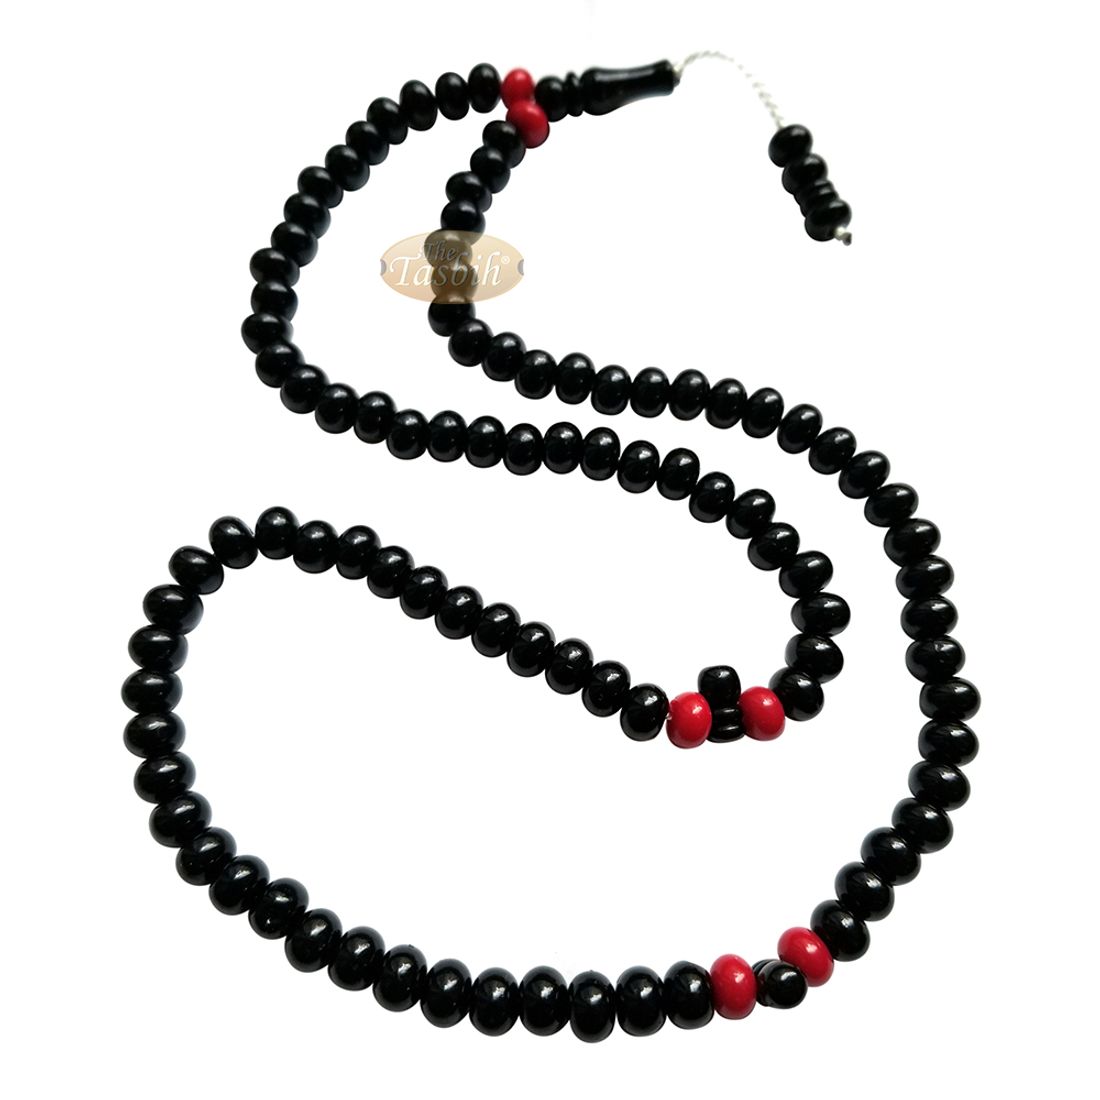 Large Durable Black Plastic Tasbih with Oval 9mm Beads – Sturdy Rosary – 6 Red Accent Beads